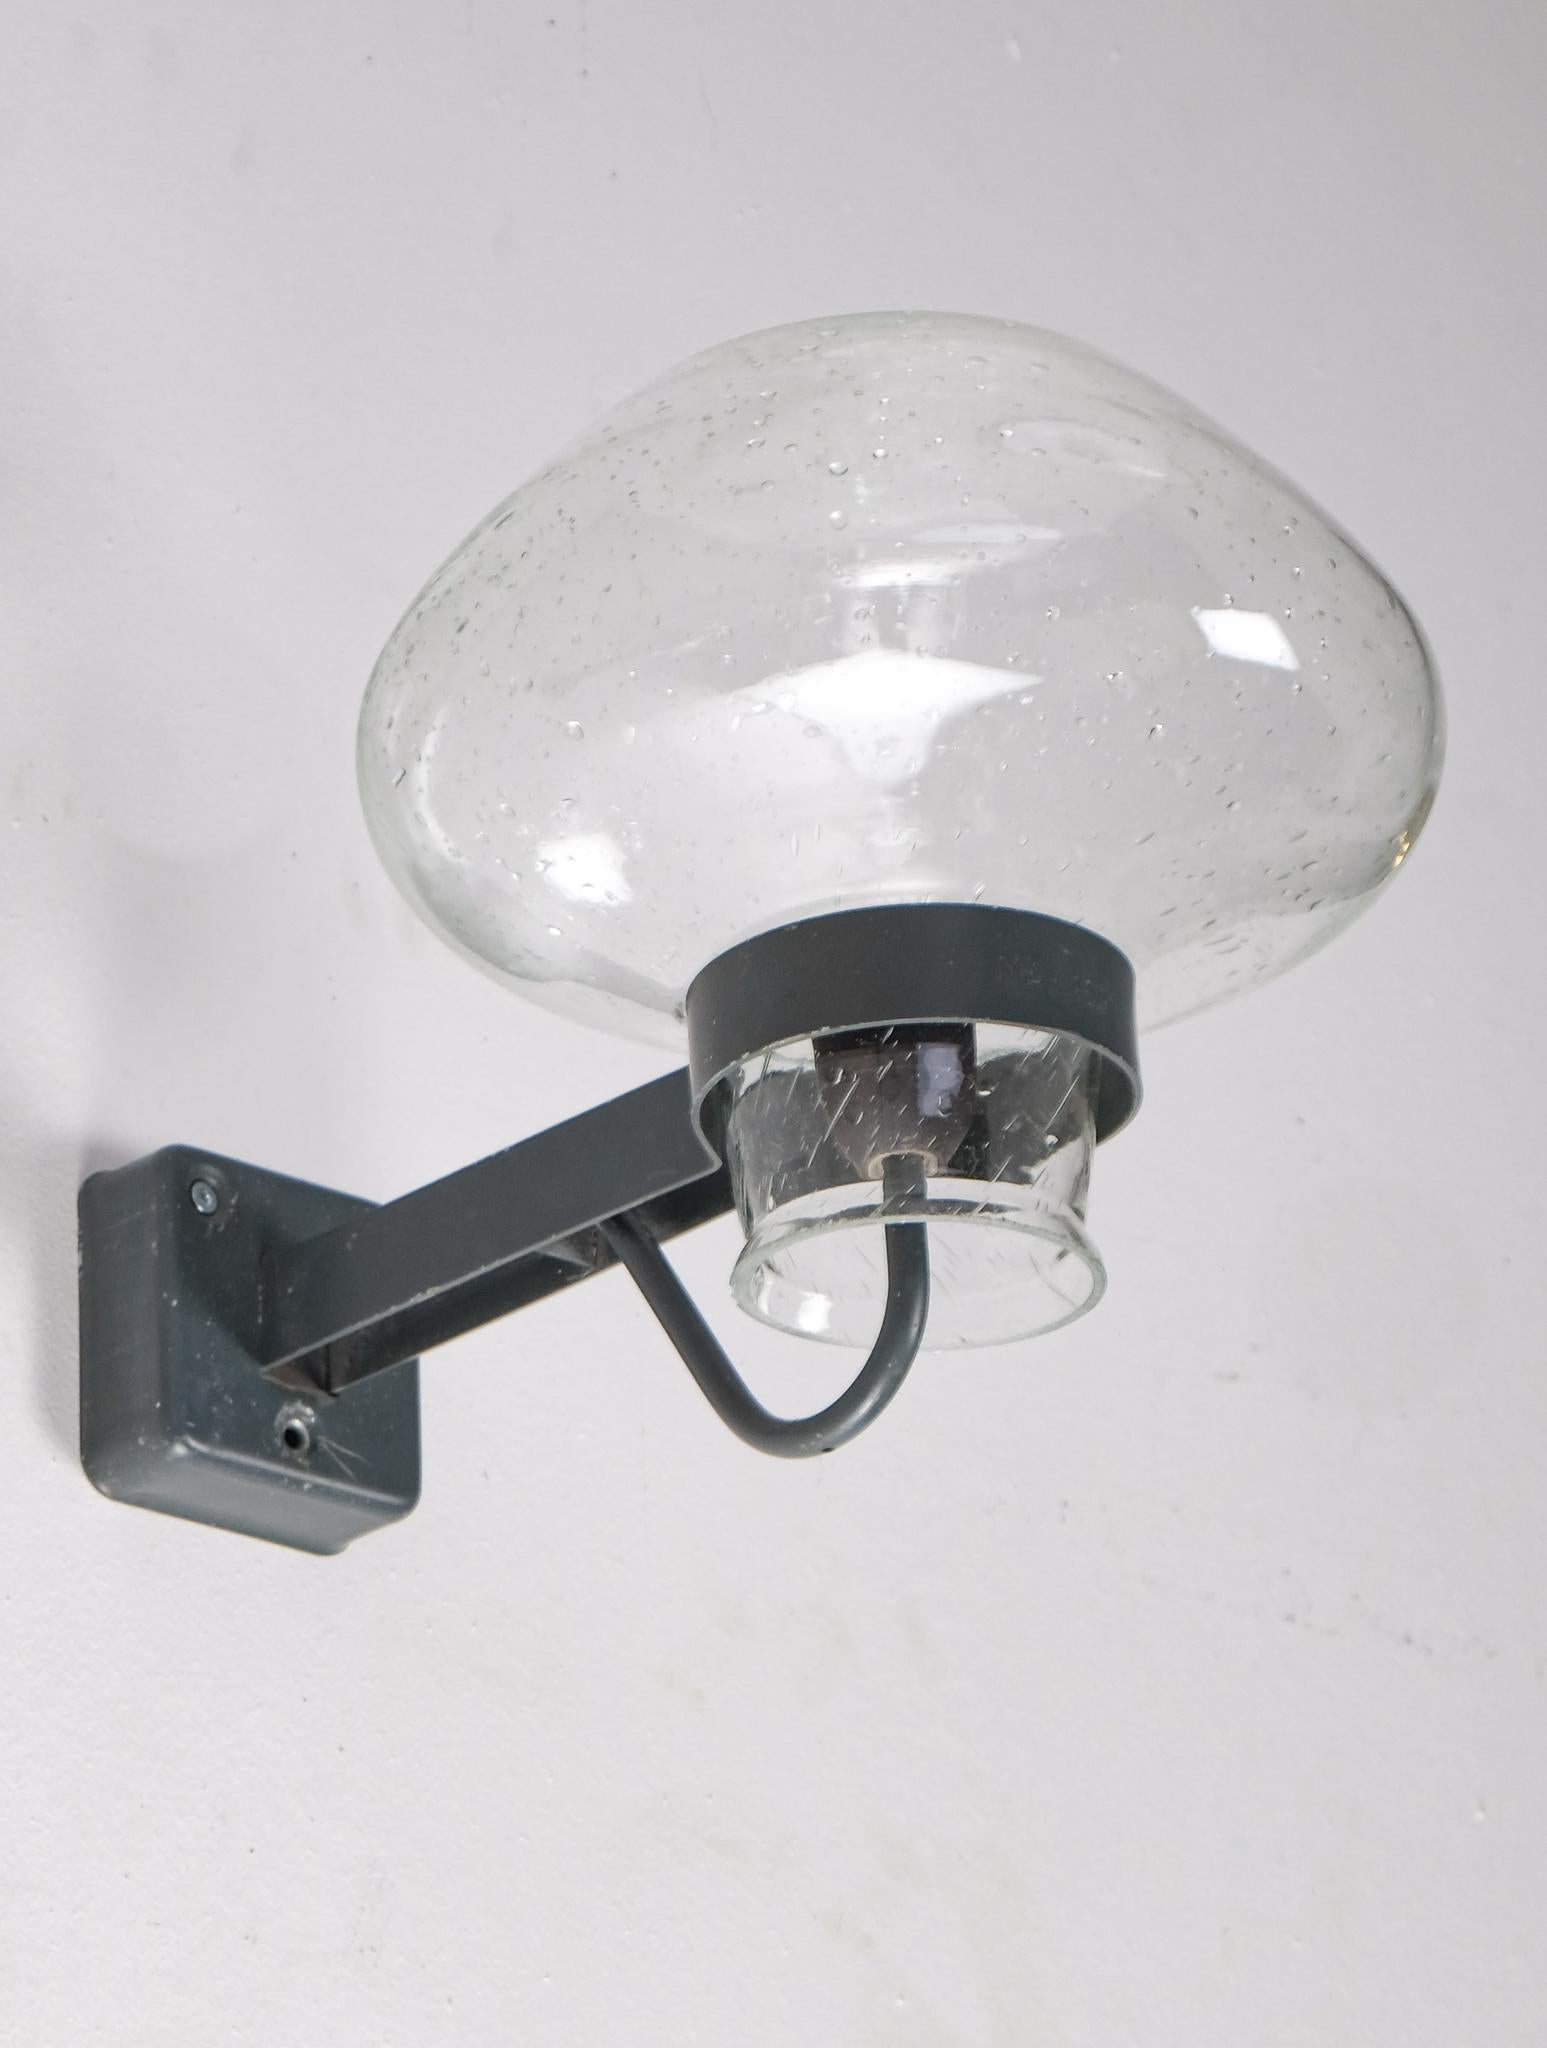 Scandinavian Modern Set of 4 Wall Lamps designed by Gunnar Asplund for ASEA, 1950s For Sale